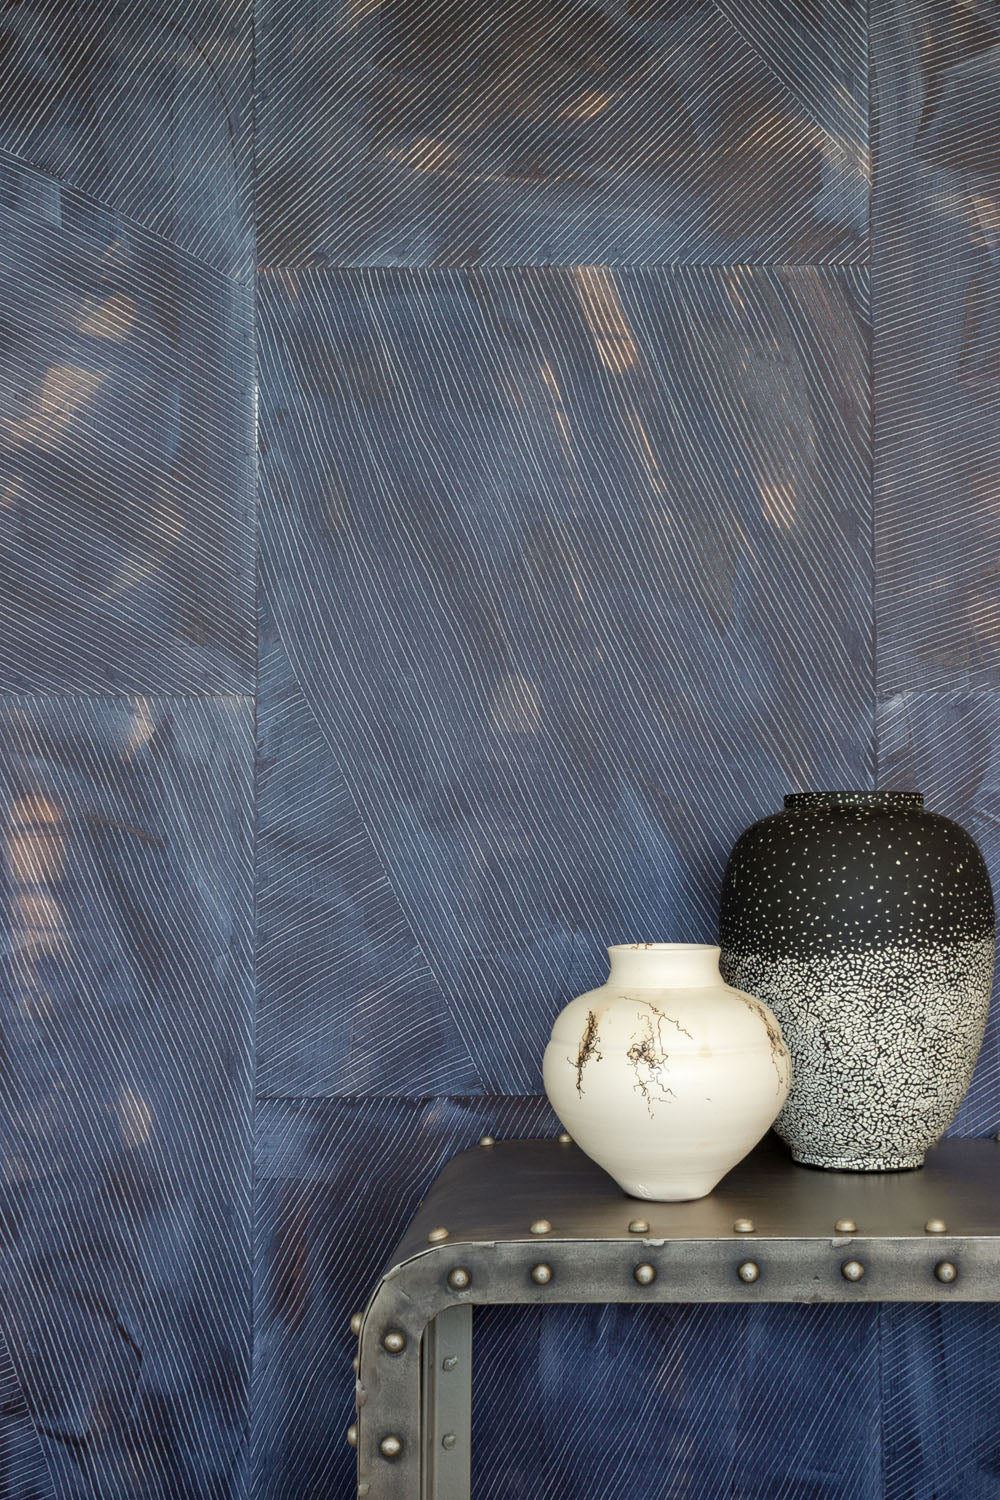 Two vases on a metal end table in front of a wall covered in multi-directional combed wallpaper in mottled indigo.